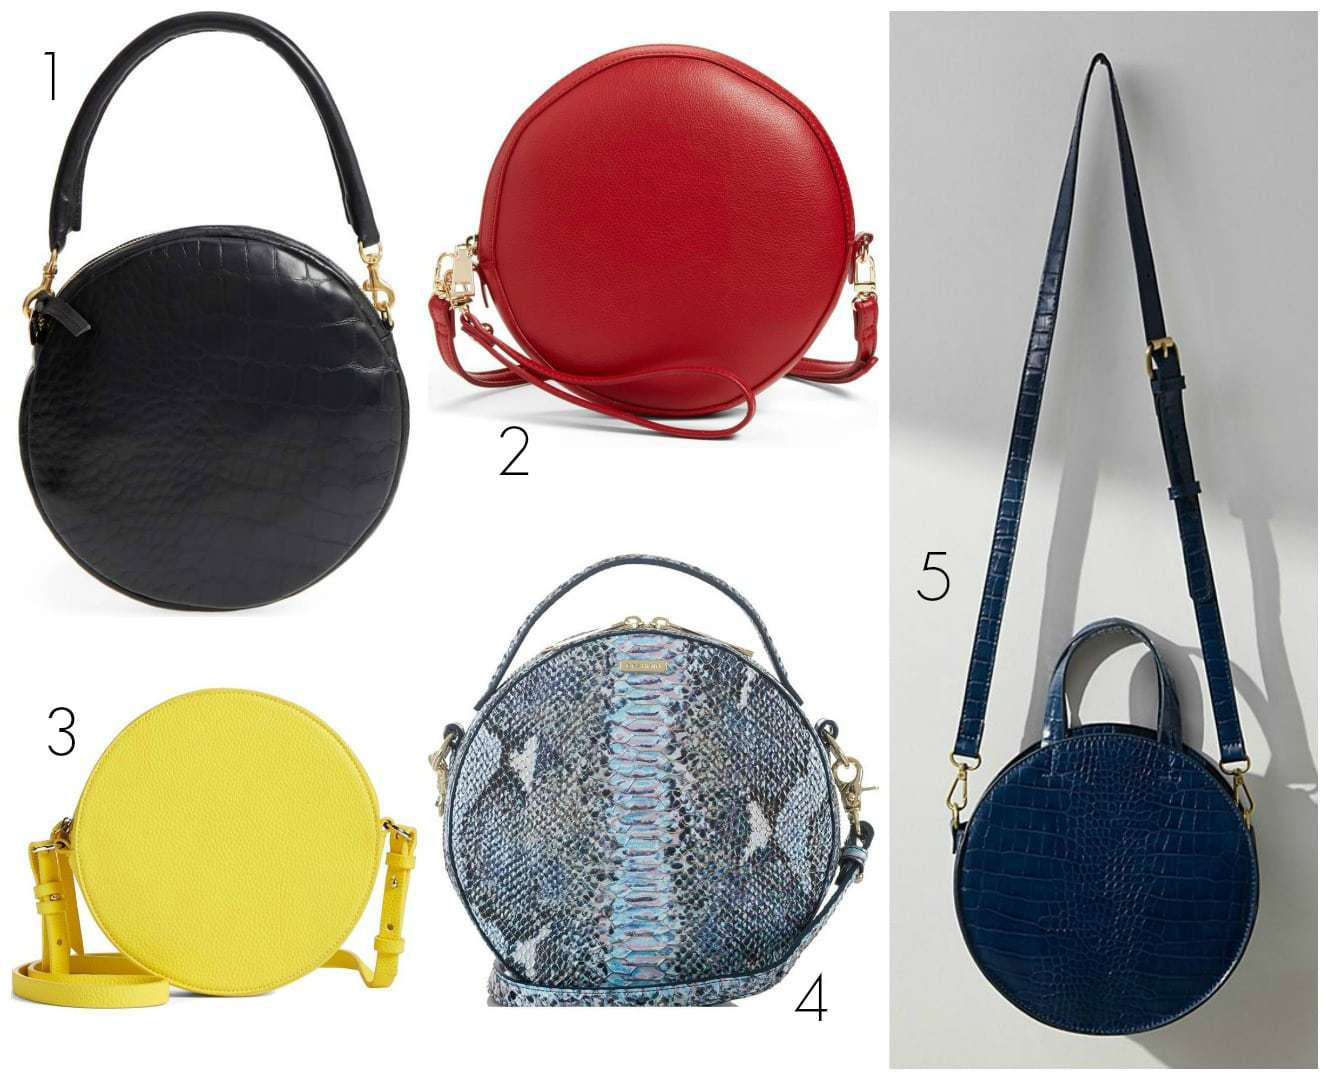 Wardrobe Oxygen picks the best circle bags for 2018 - these choices are stylish this spring and summer and beyond